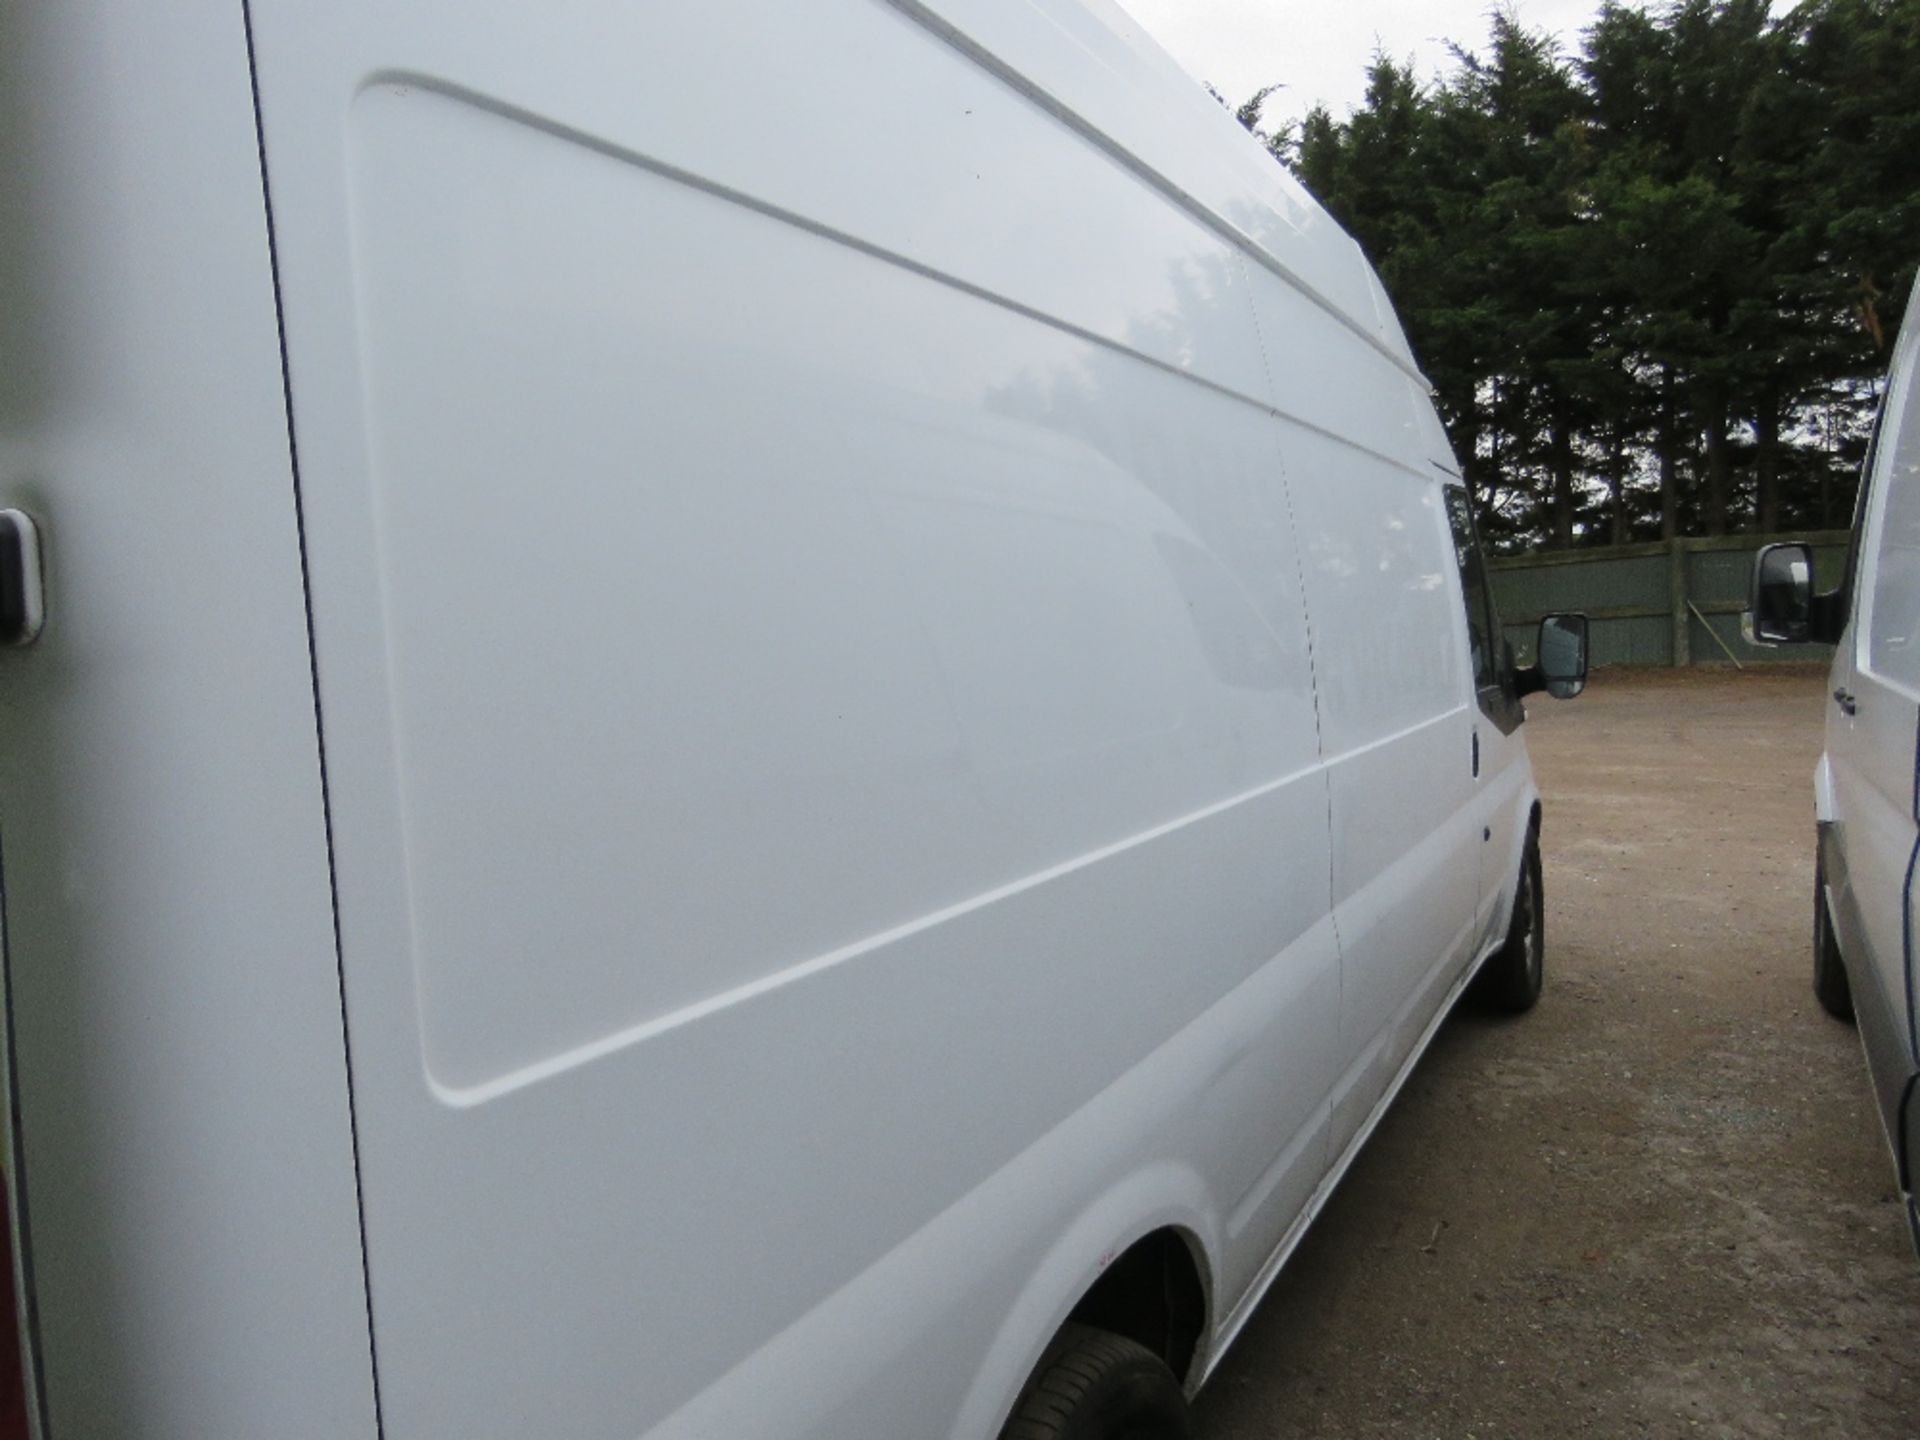 FORD TRANSIT PANEL VAN REG:YS14 VPM WITH ONBOARD COMPRESSOR AND GENERATOR. WITH V5 PLUS MOT TILL MAY - Image 7 of 10